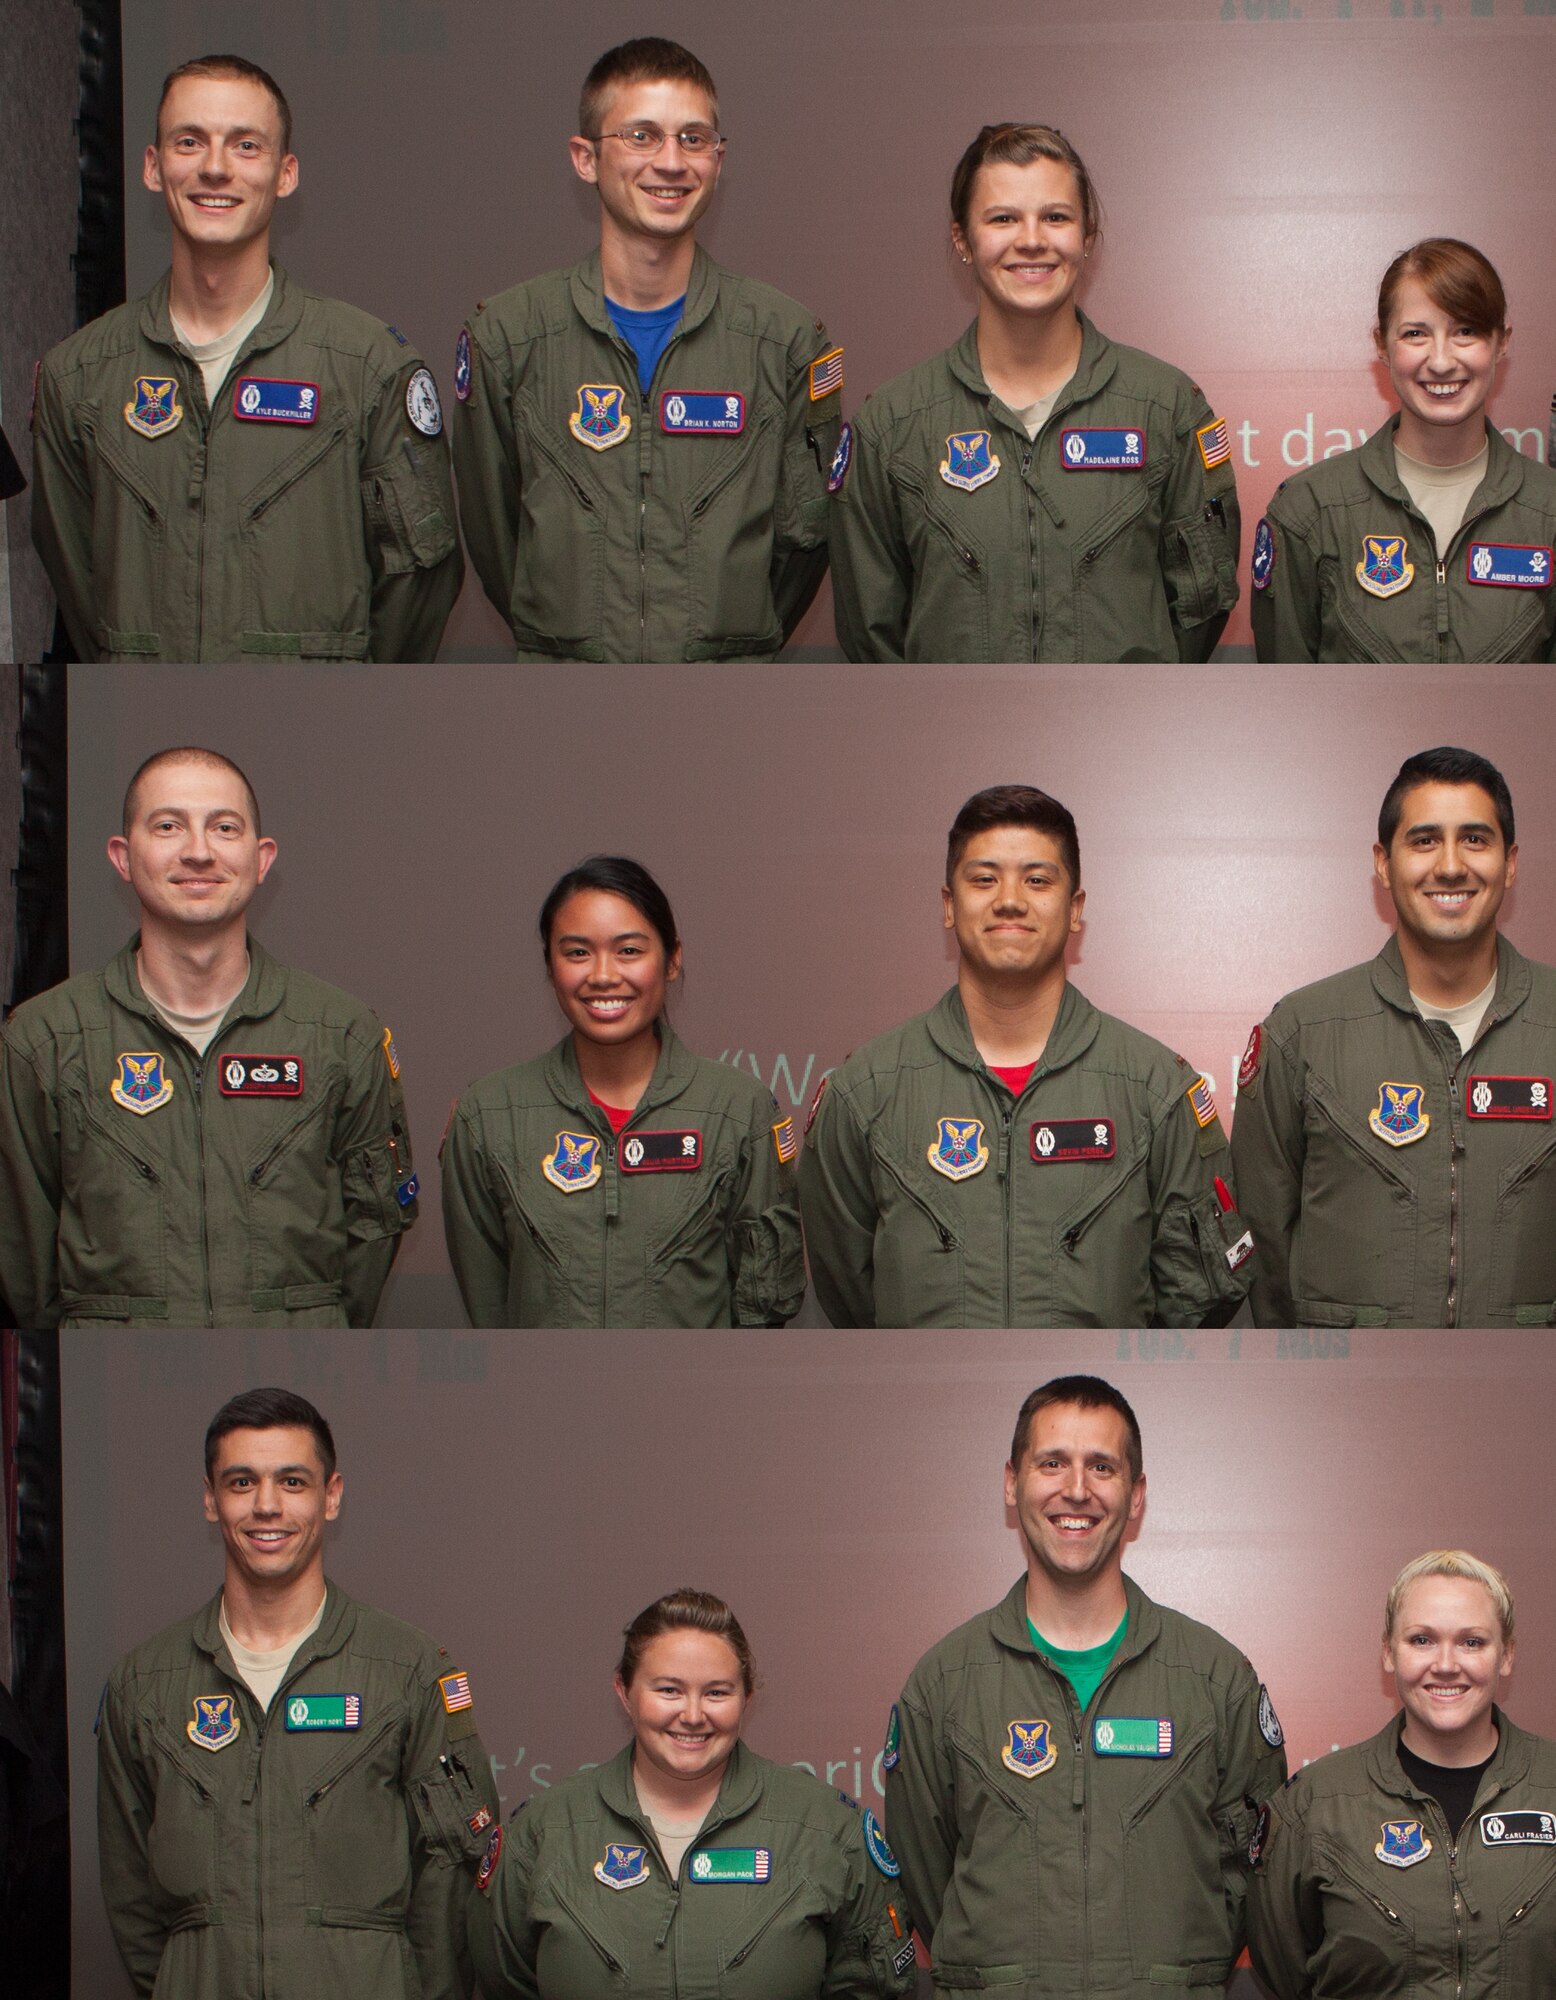 Competitors from the 319th, 320th and 321th Missile Squadron and their trainers for the Global Strike Challenge pose for separate photos on F.E. Warren Air Force Base, Wyo., July 31, 2015. The 90th Missile Wing held an announcement event at the Trail's End Event Center on base introducing all the GSC competitors. (U.S. Air Force photo illustration by Lan Kim)